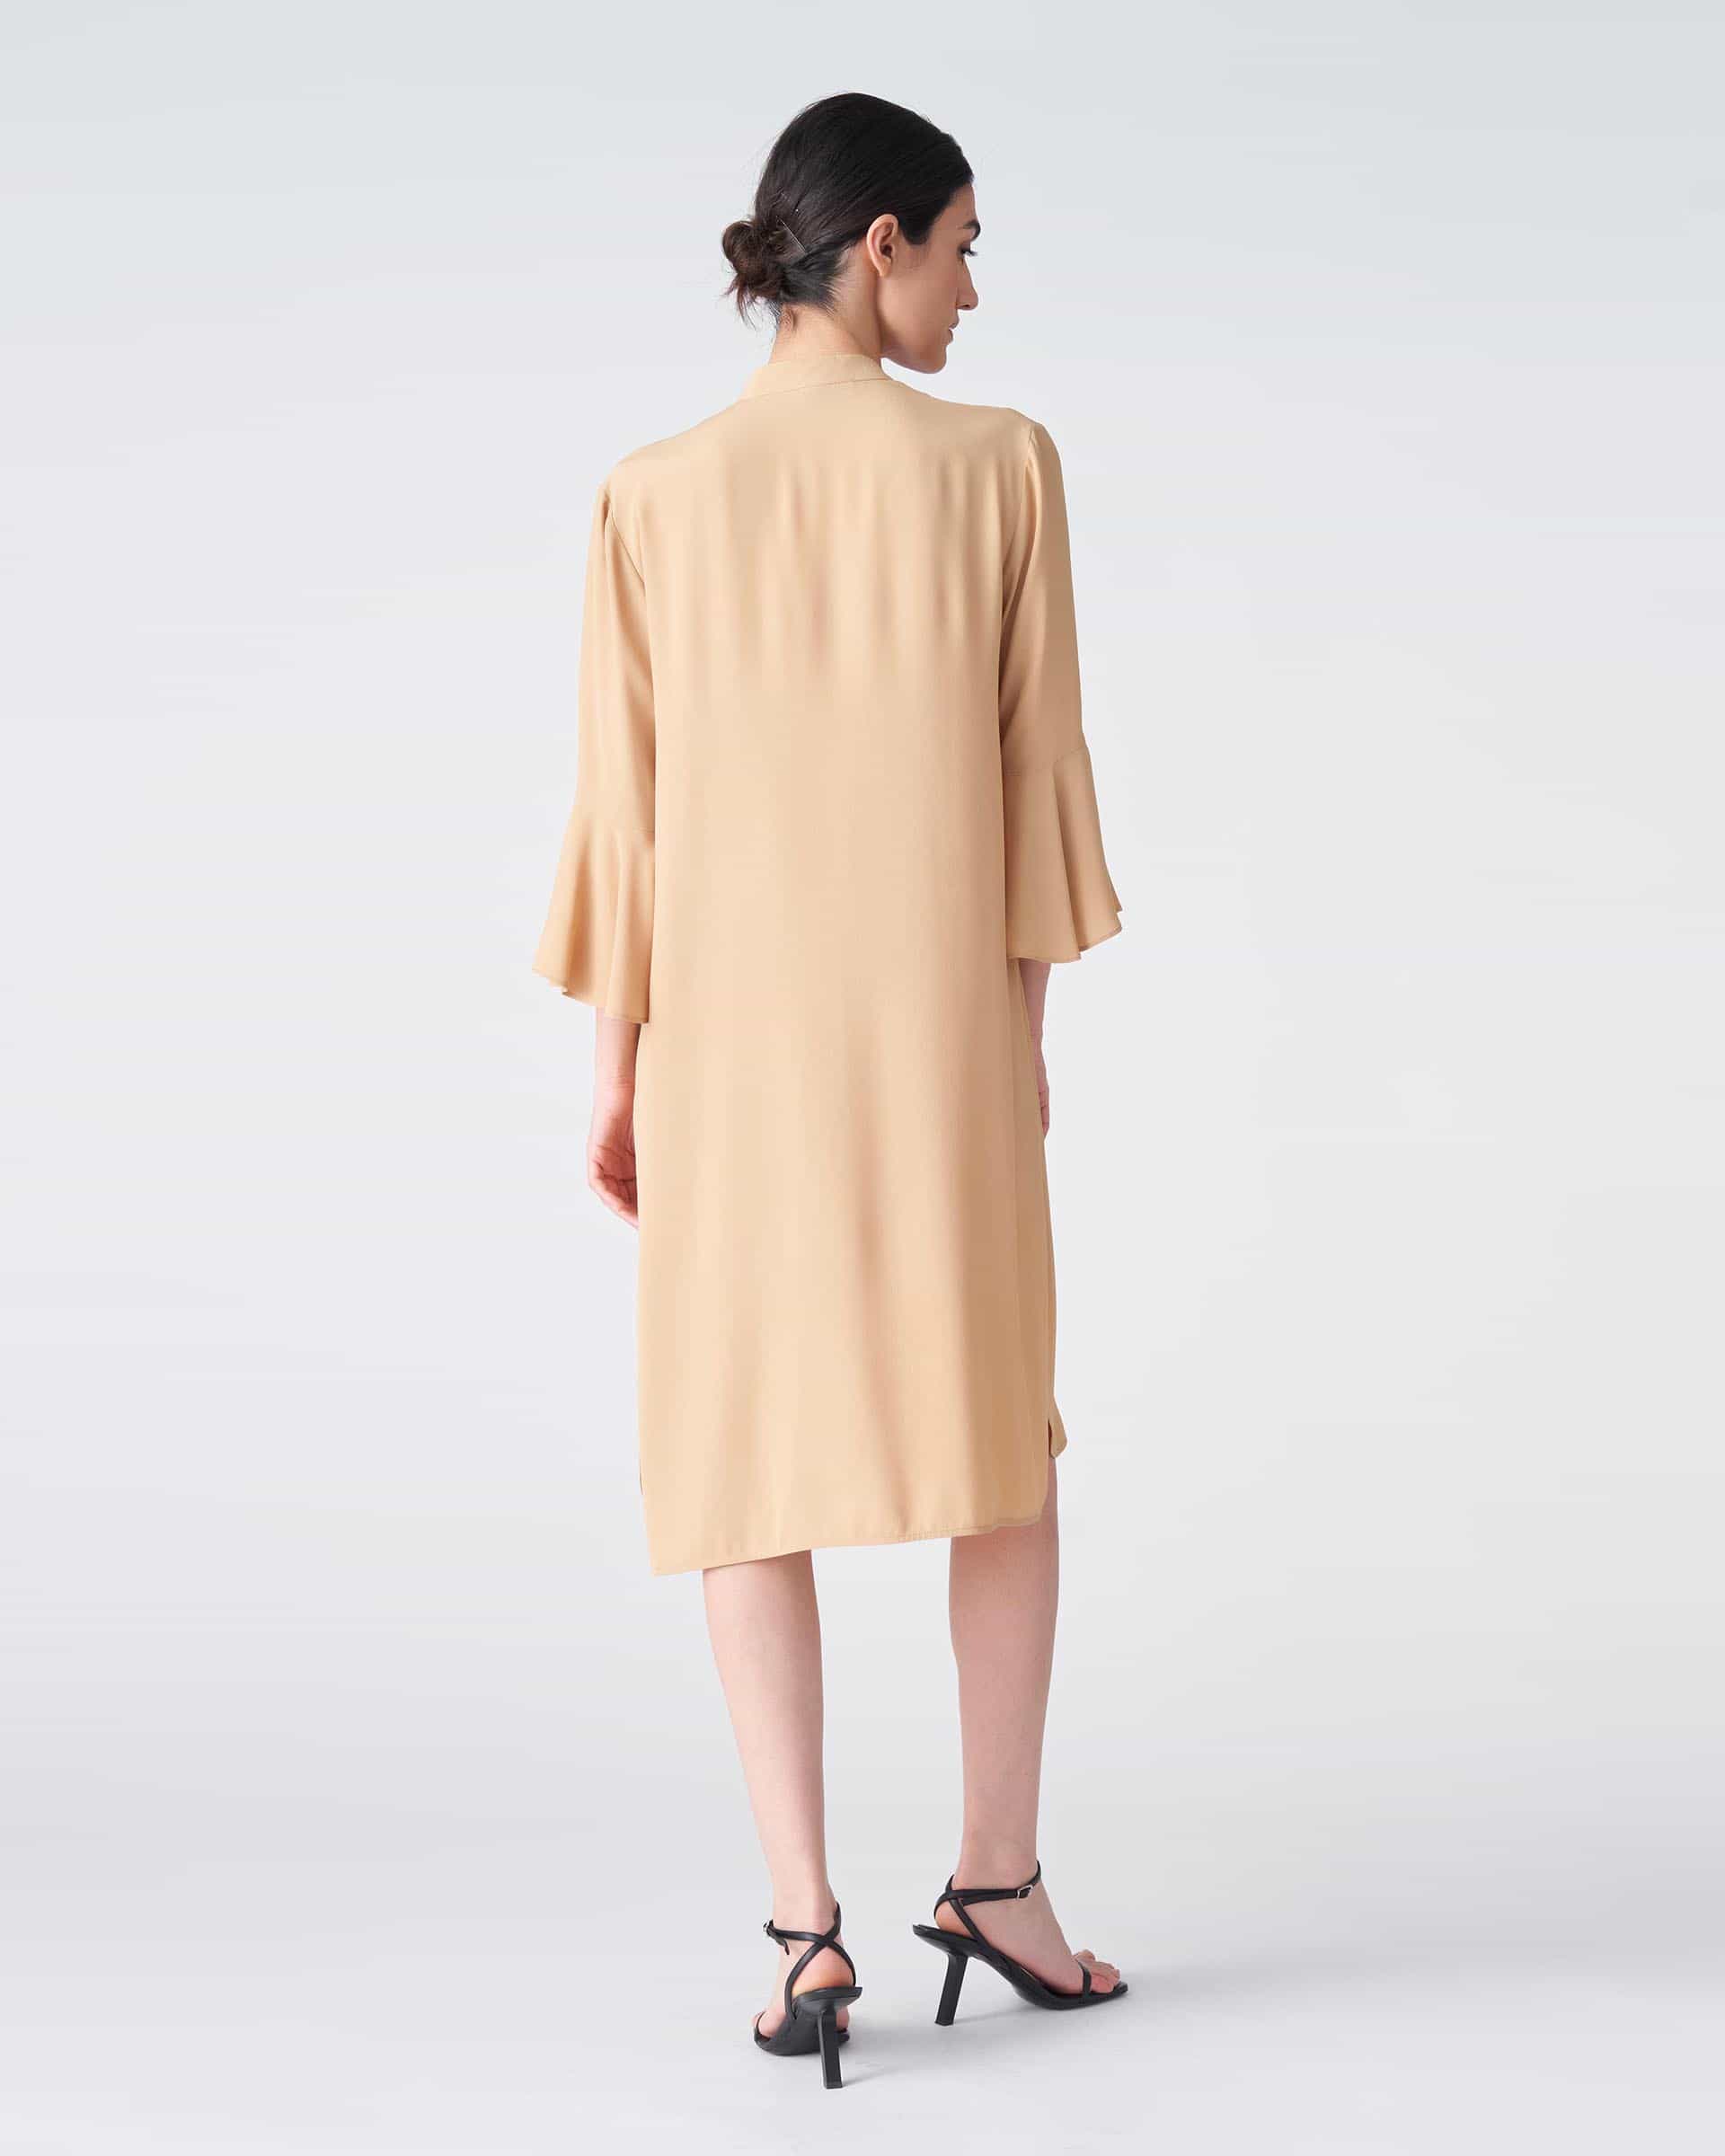 The Market Store | Chemisier Dress With Rouches